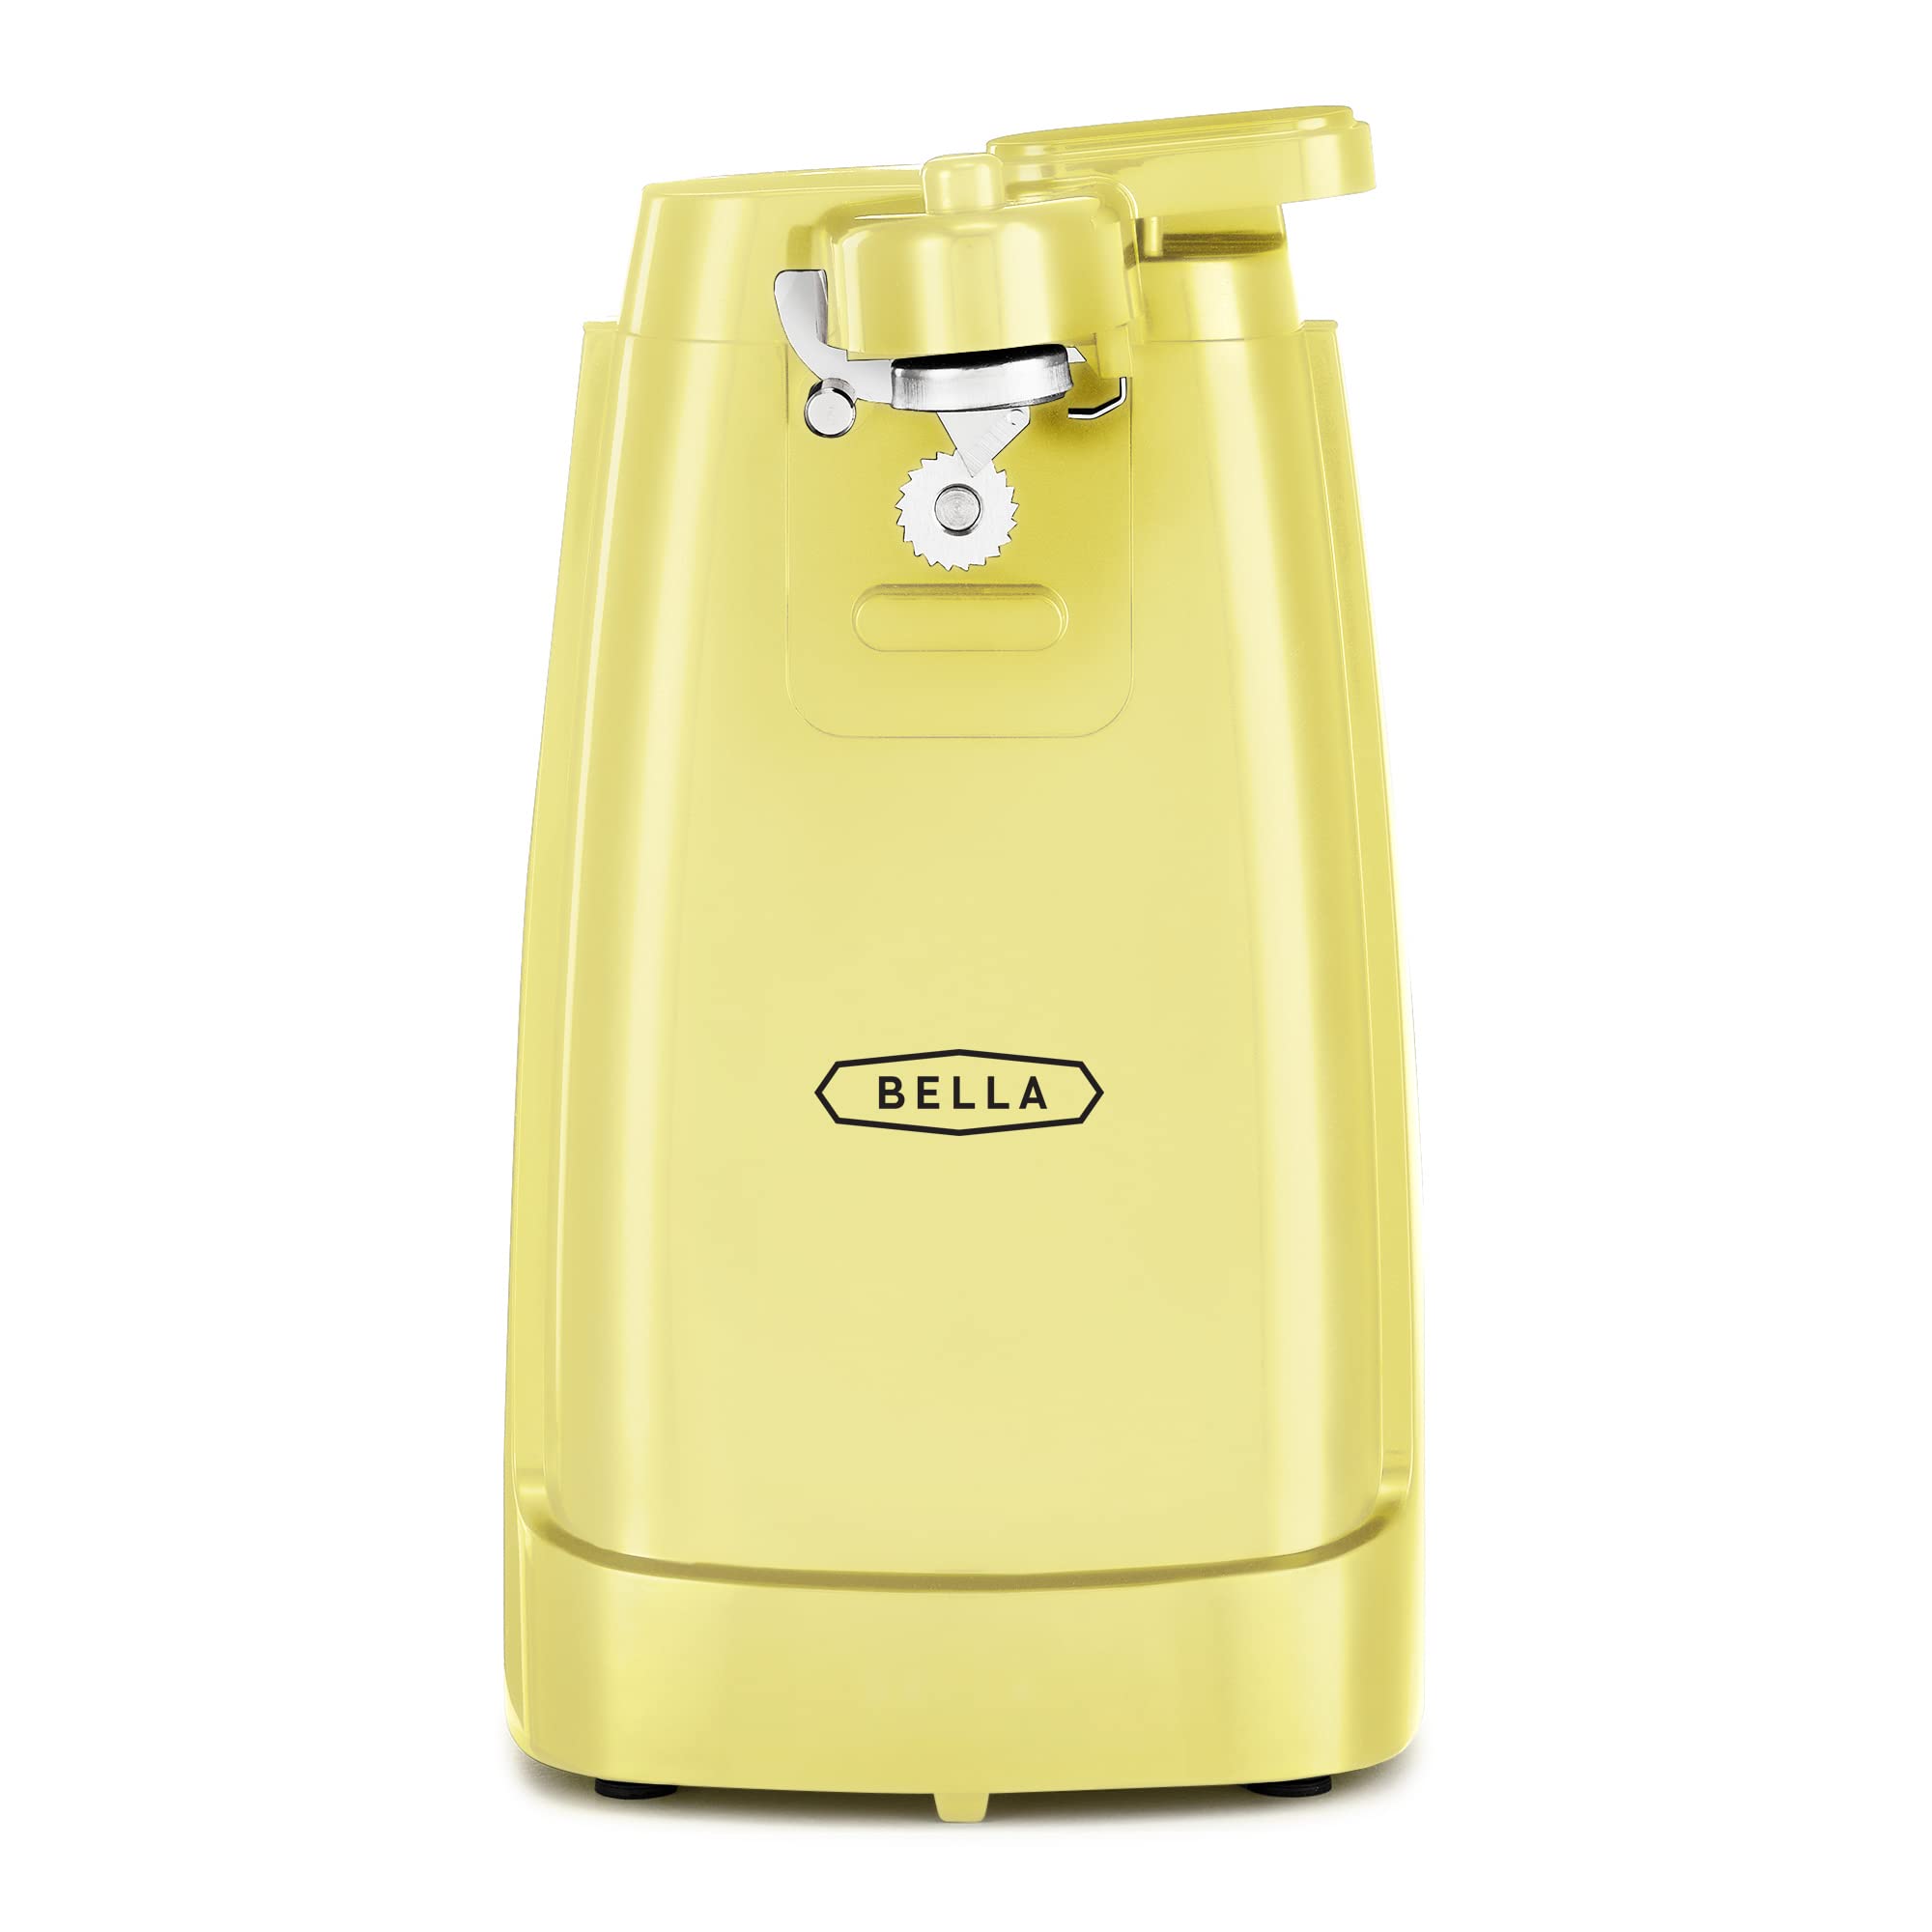 BELLA Electric Can Opener and Knife Sharpener (Yellow) $11.90 + Free Shipping w/ Prime or on orders over $35